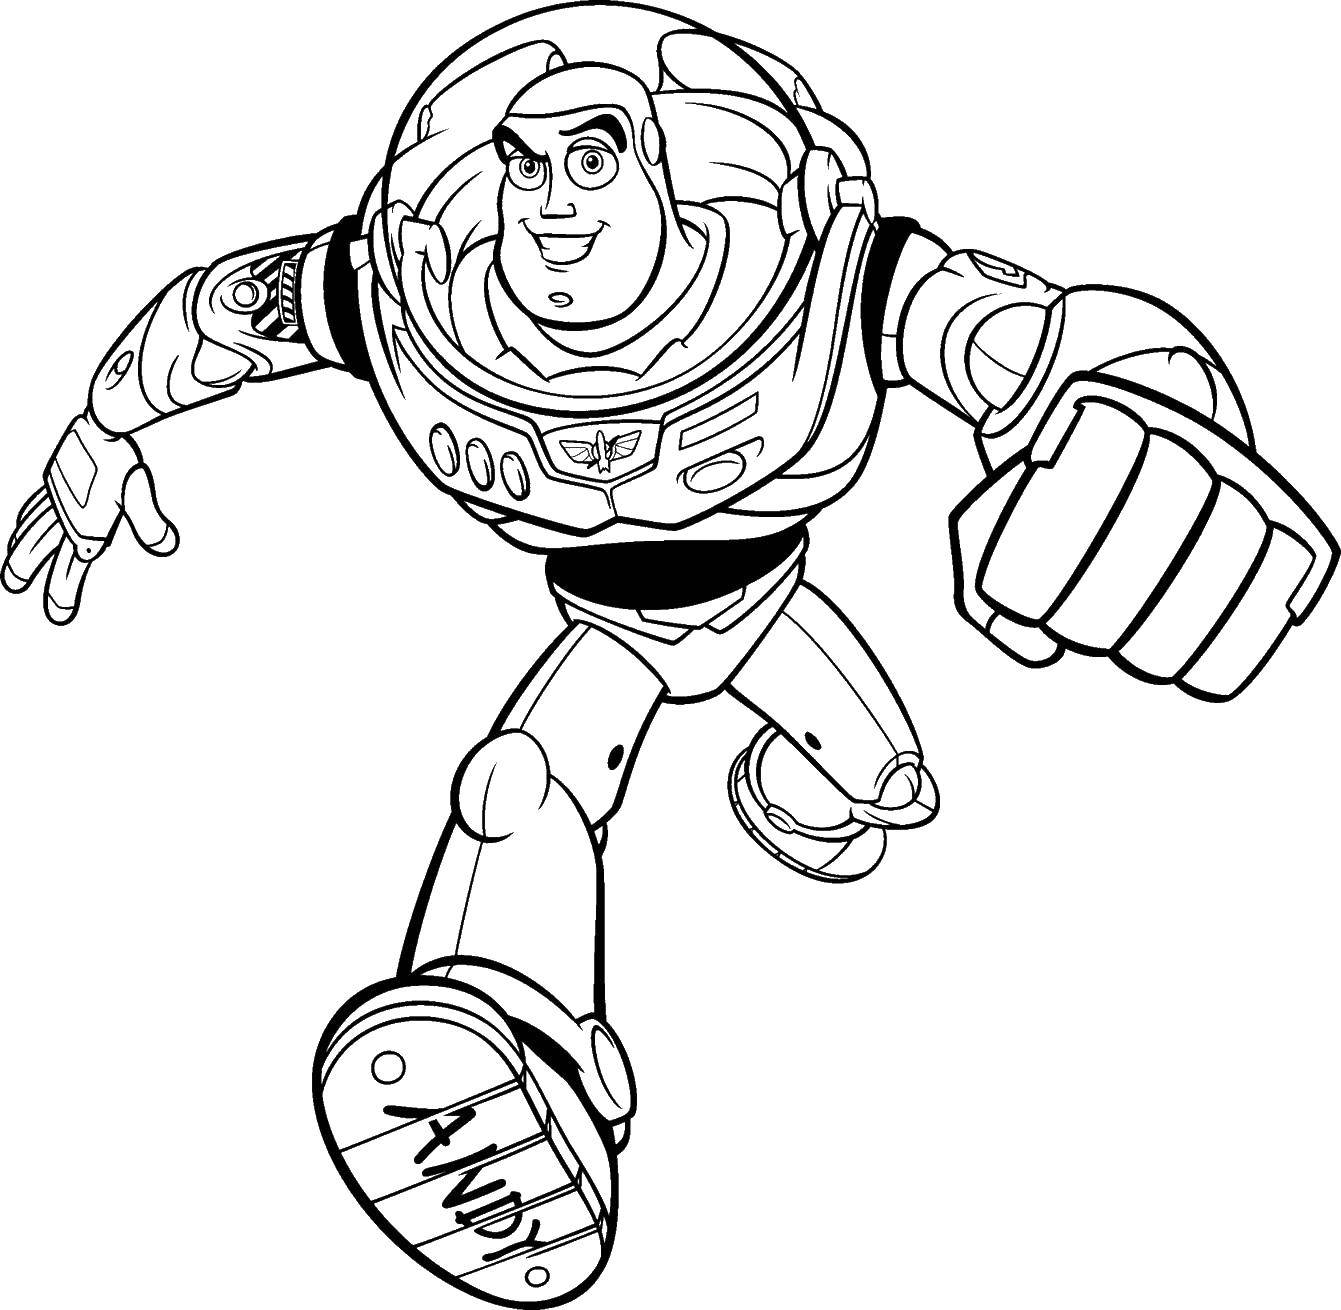 Coloring Buzz Lightyear. Category toy story. Tags:  Buzz Lightyear, toy, suit.